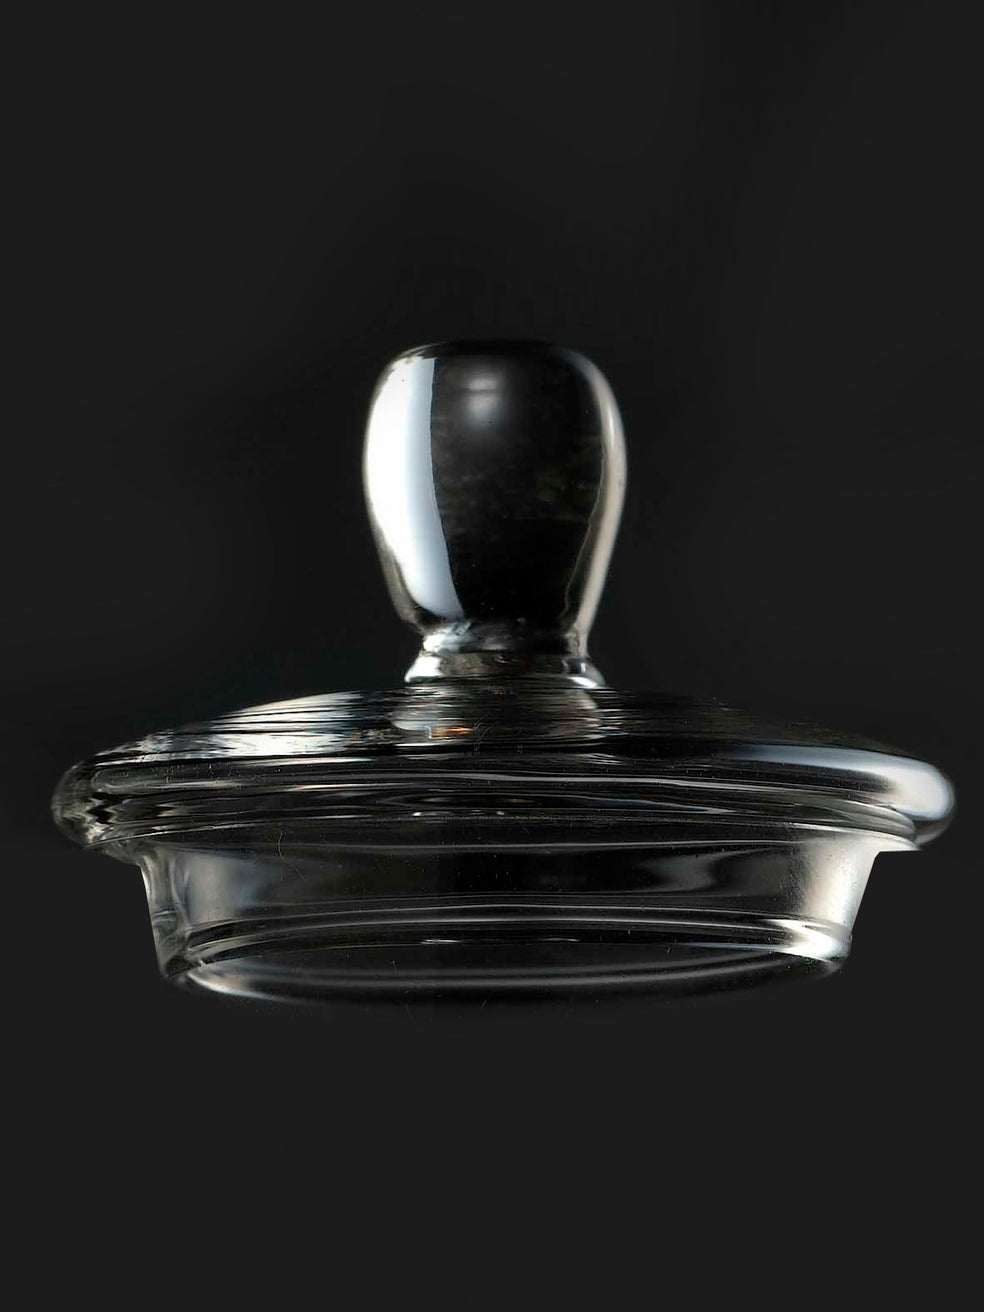 This tasting cap is designed specifically for the Copita glass.